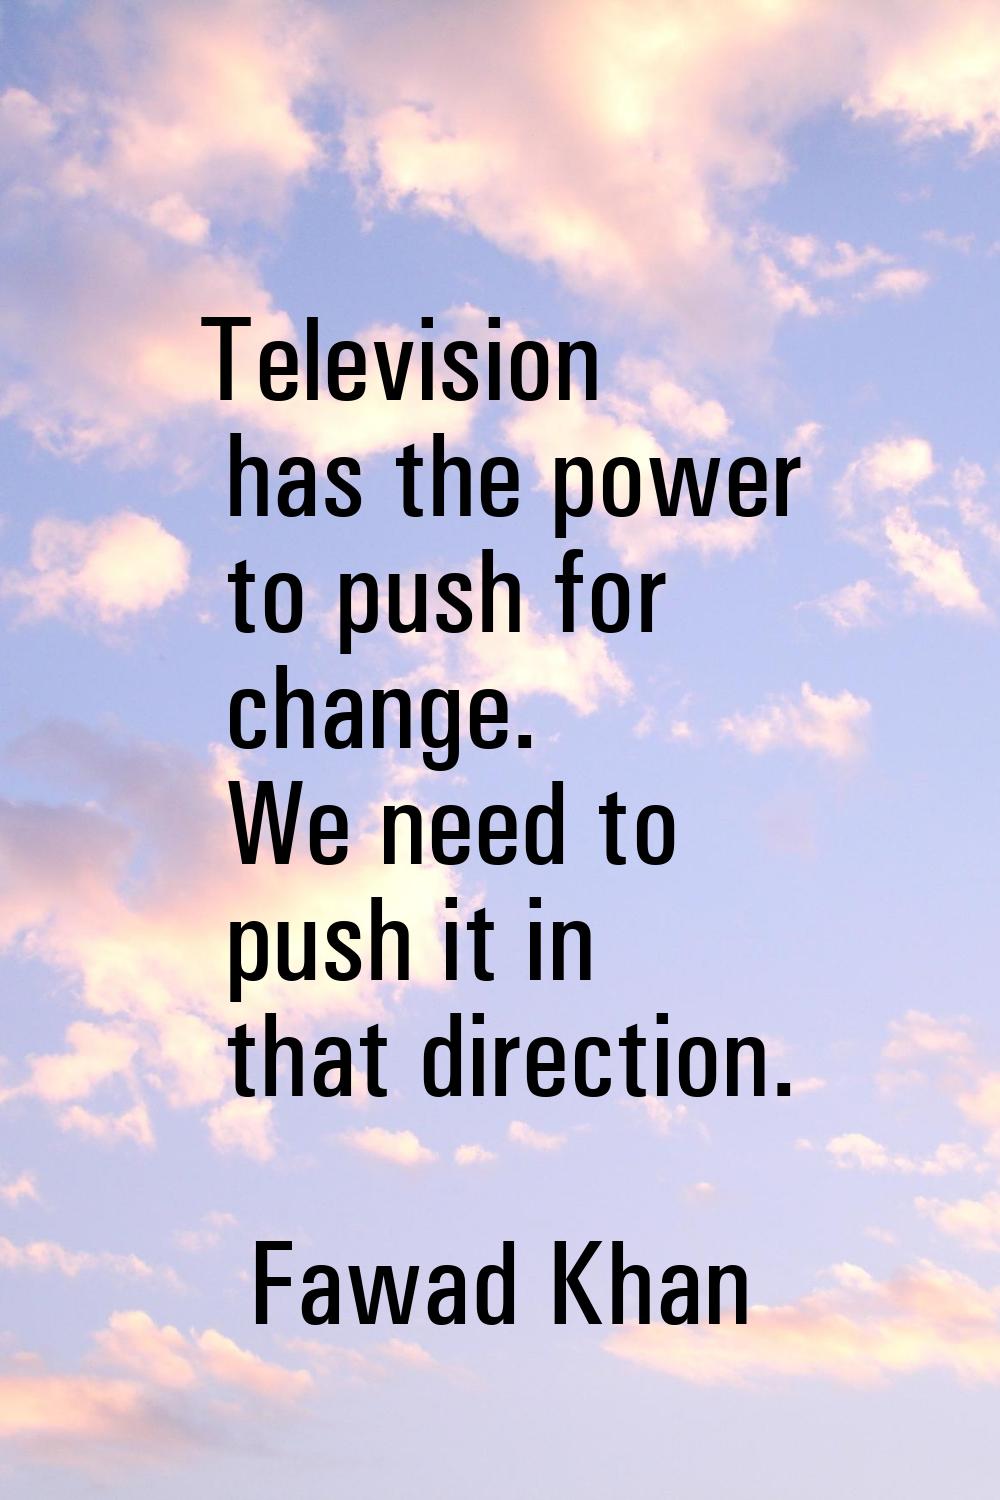 Television has the power to push for change. We need to push it in that direction.